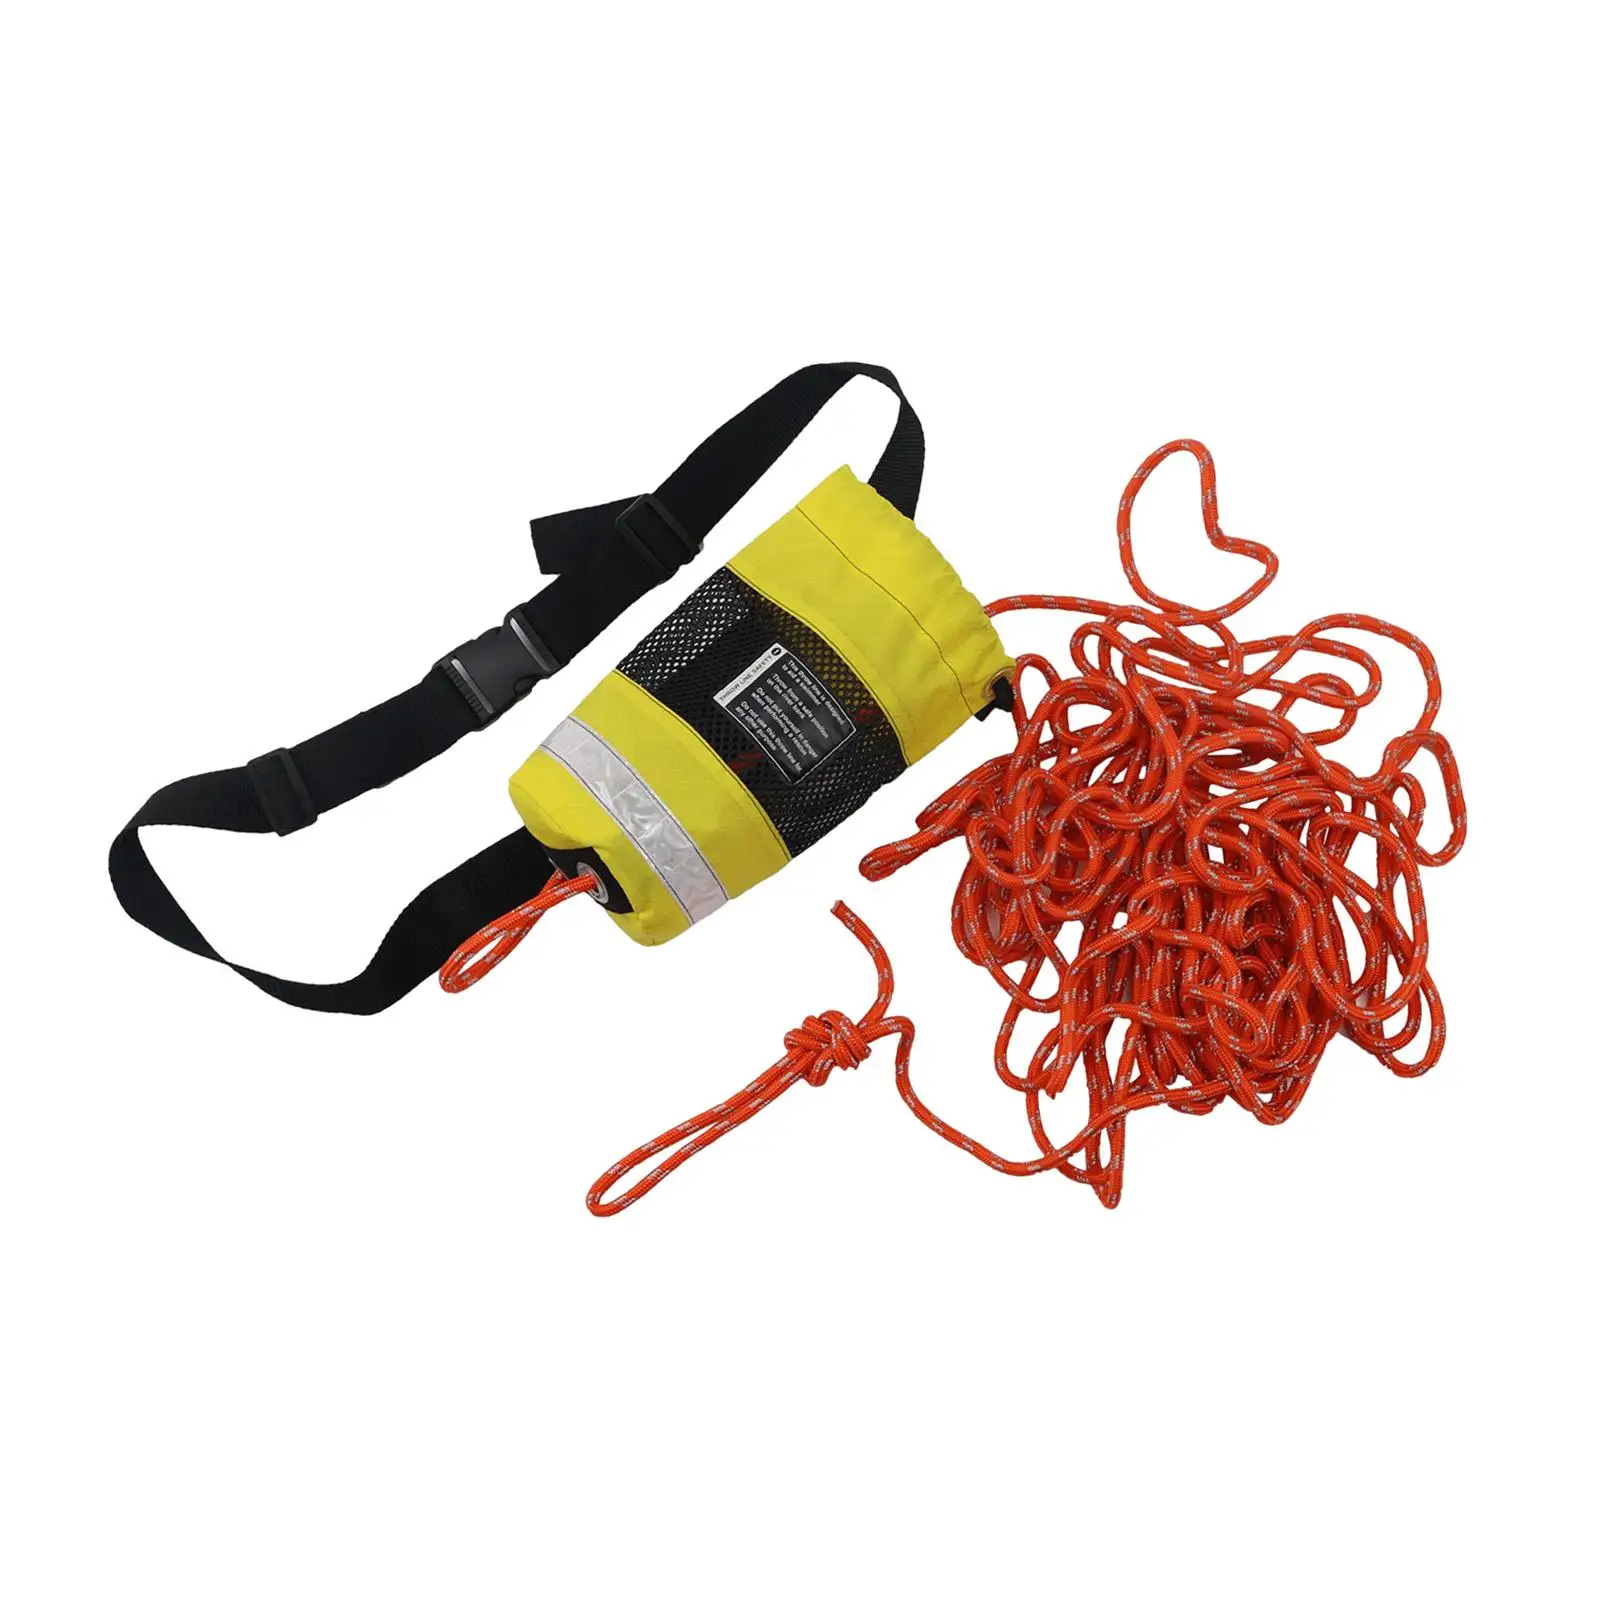 Water Floating Throw Rope Reflective Water Sports Kayaking Rafting Boating Accessories